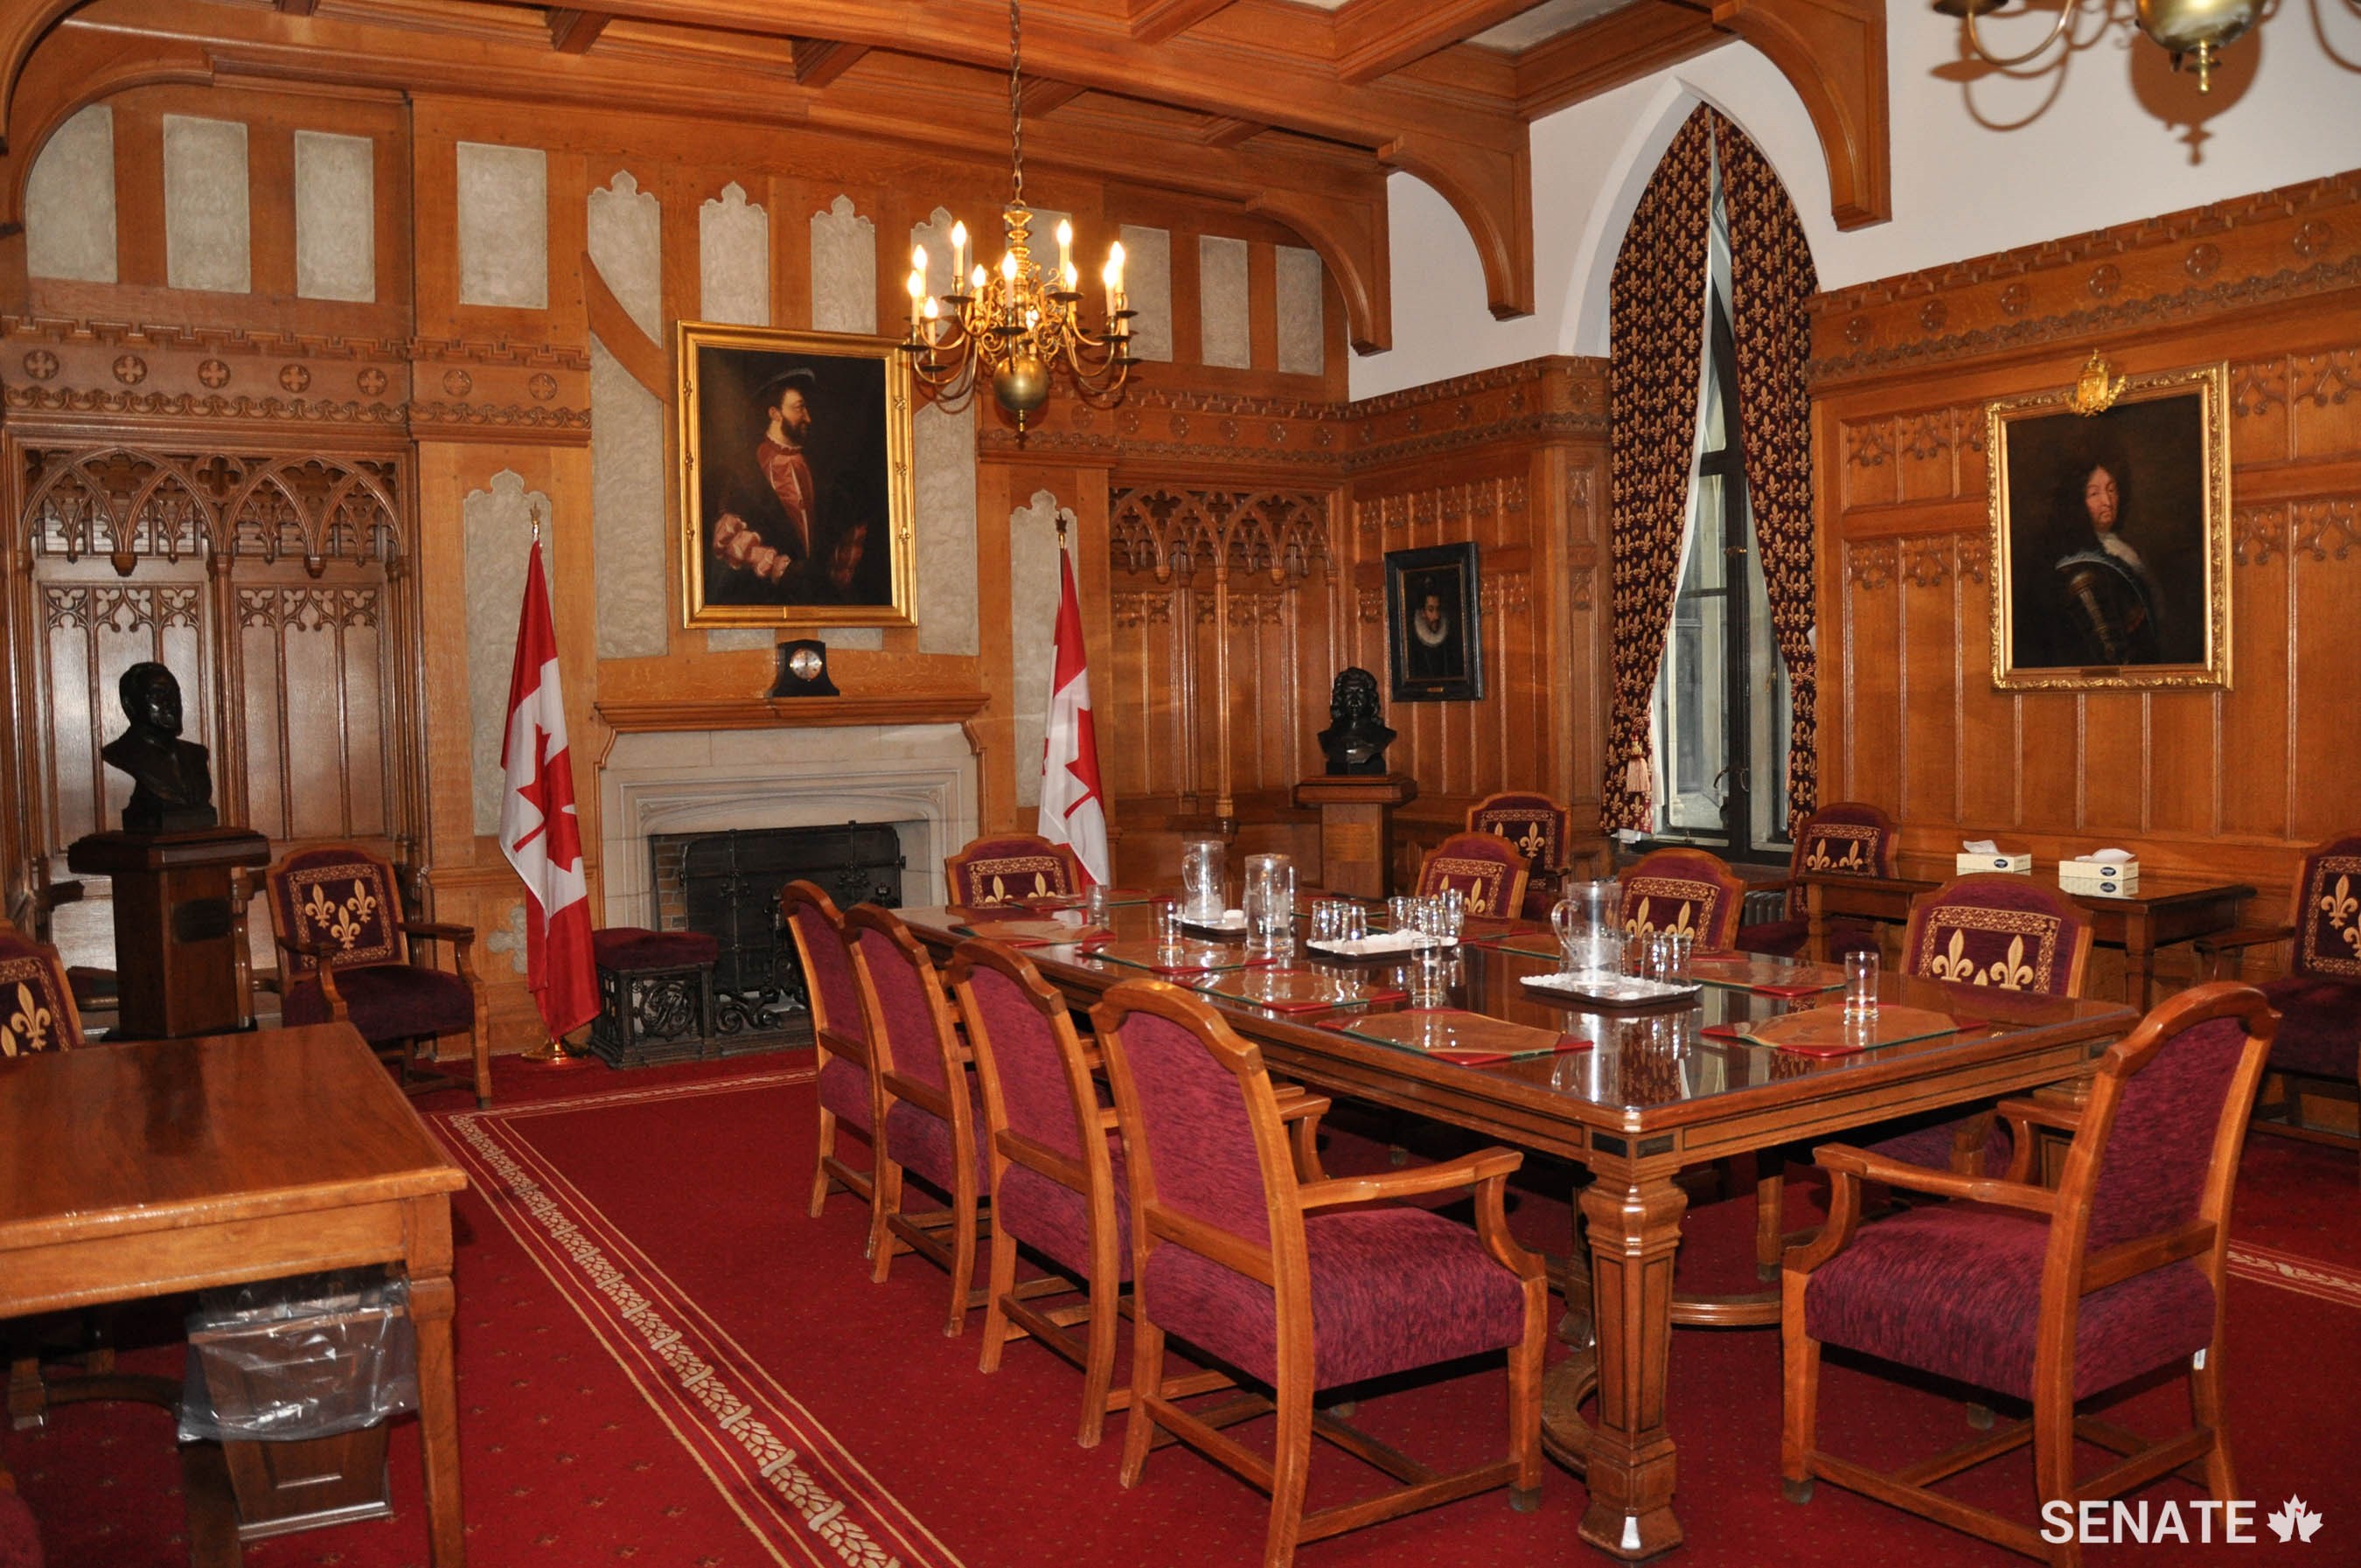 The Salon de la Francophonie is a Senate committee room in Parliament’s Centre Block that pays tribute to Canada’s French heritage and its membership in l’Organisation internationale de la Francophonie.